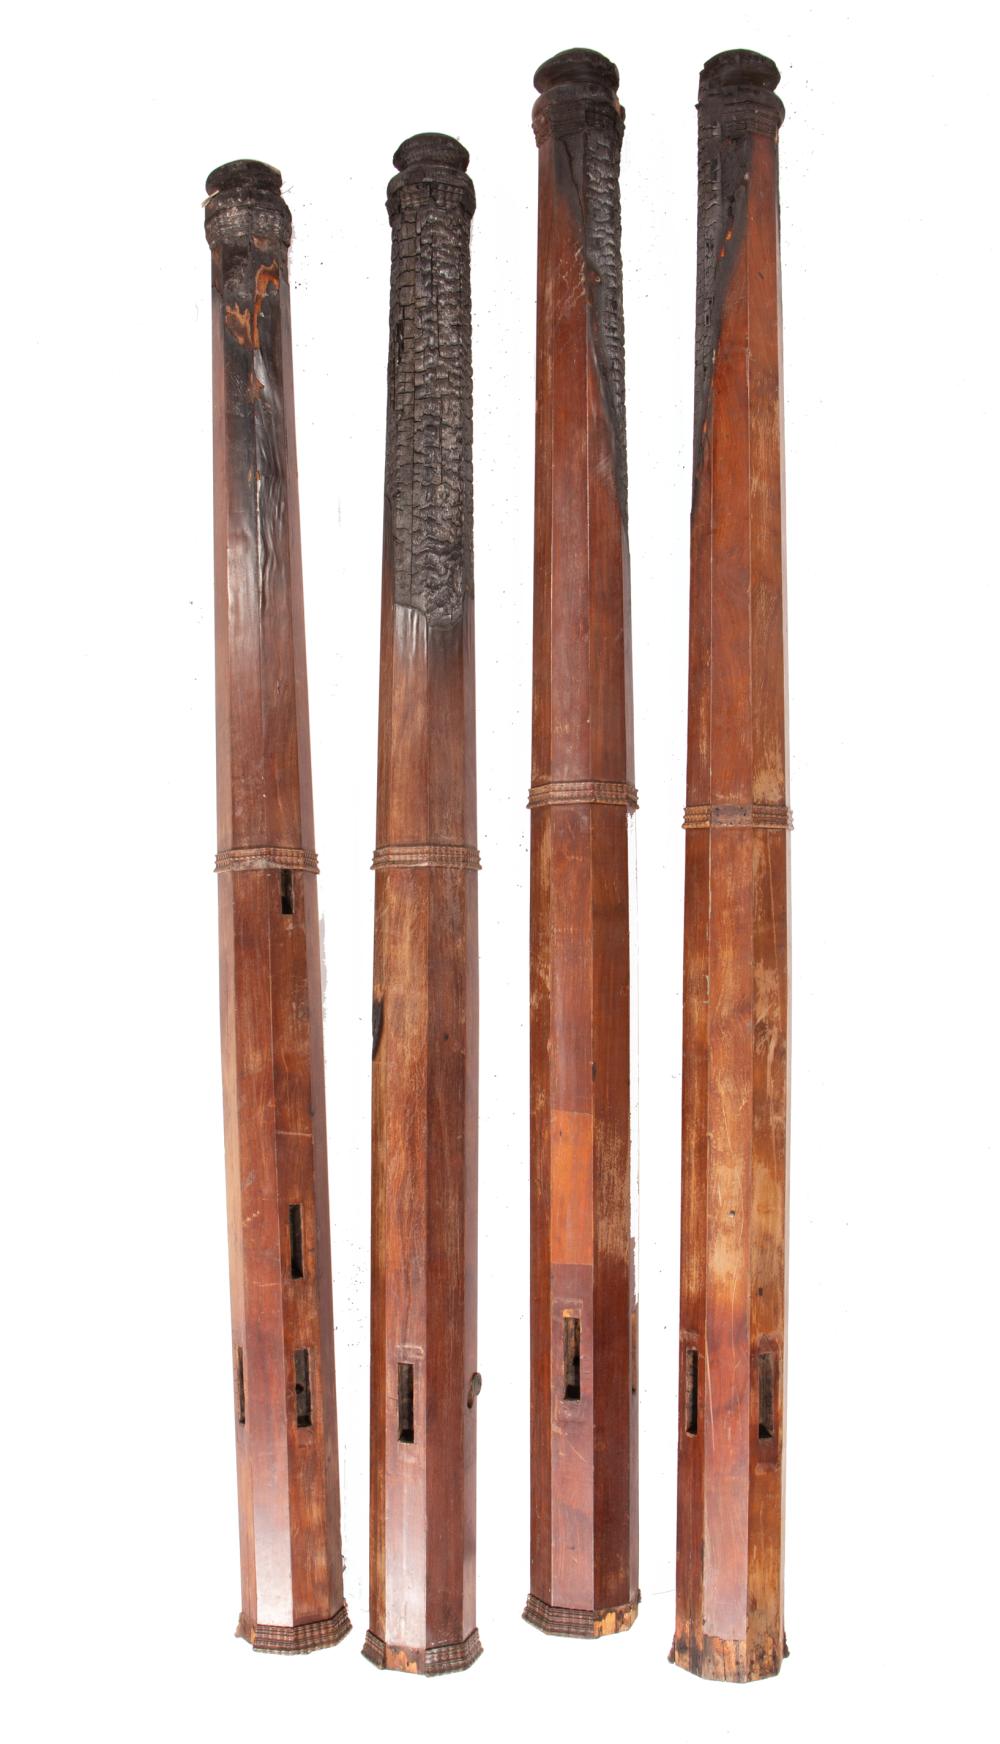 FOUR BED POSTSFour Bed Posts , c. 1840-1865